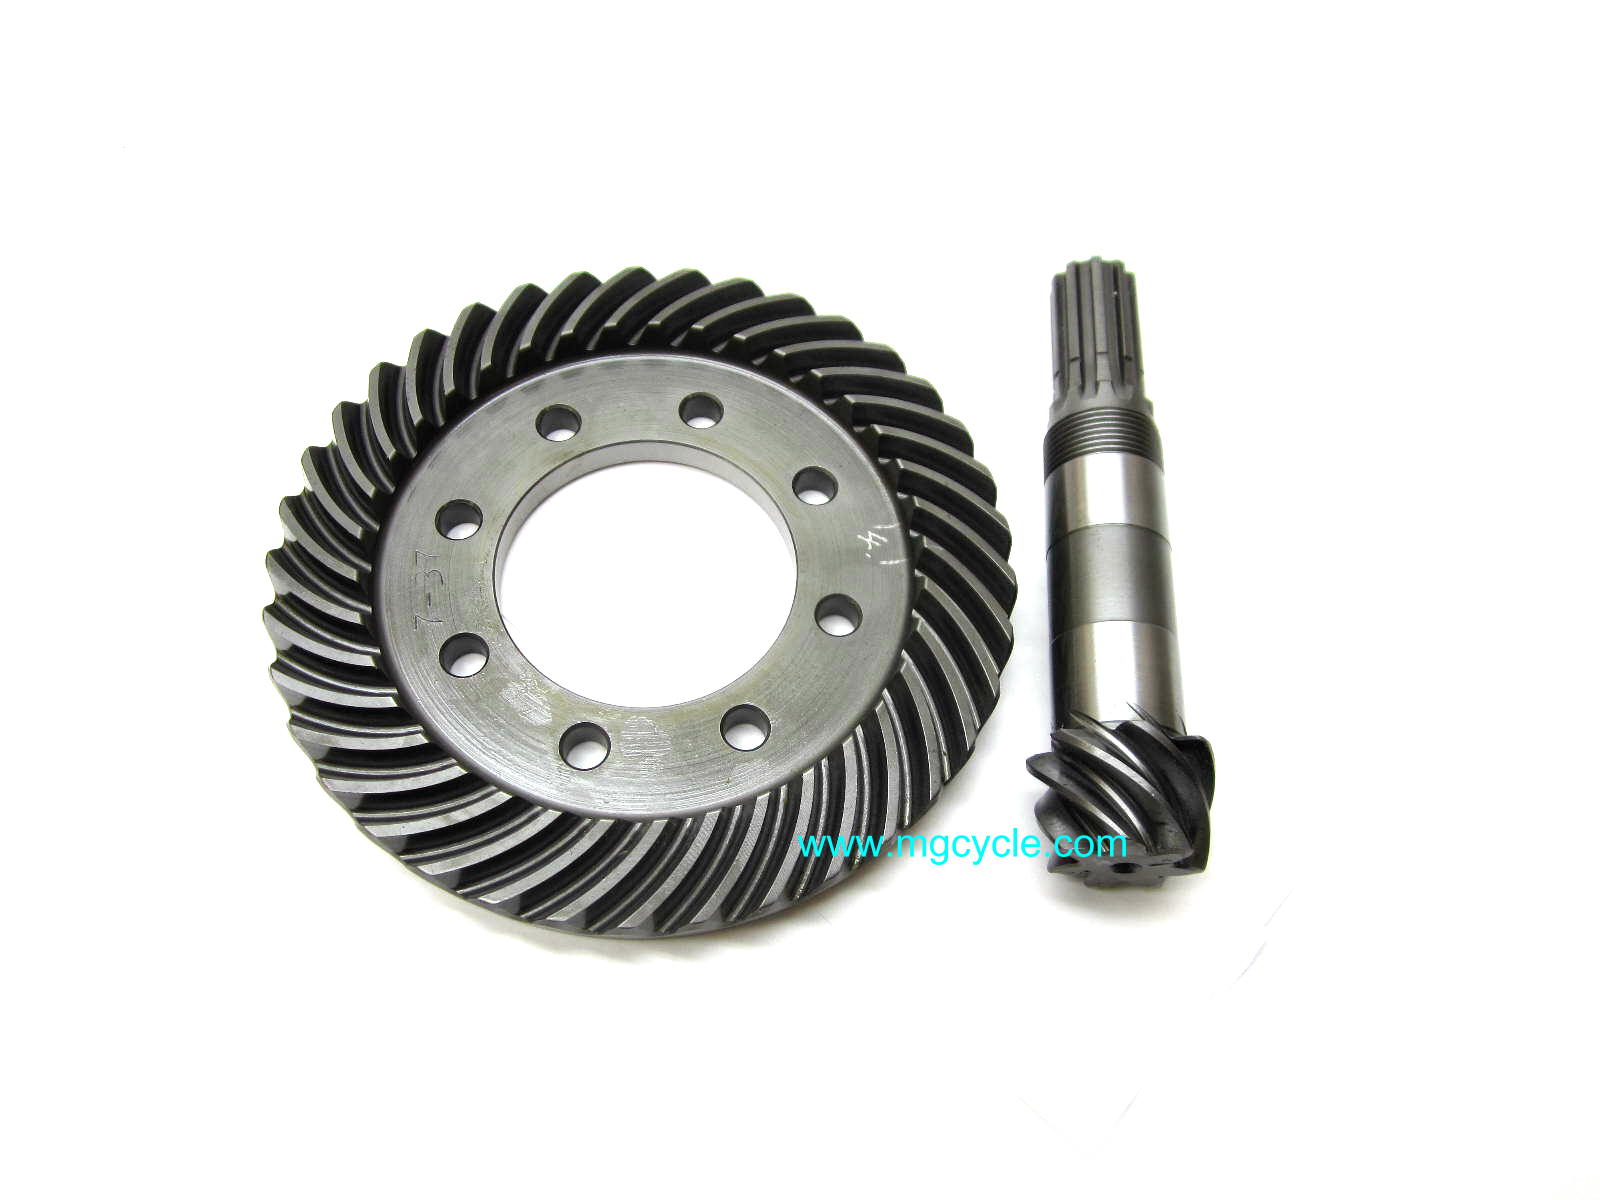 7-37 sidecar ring and pinion gear set - Click Image to Close